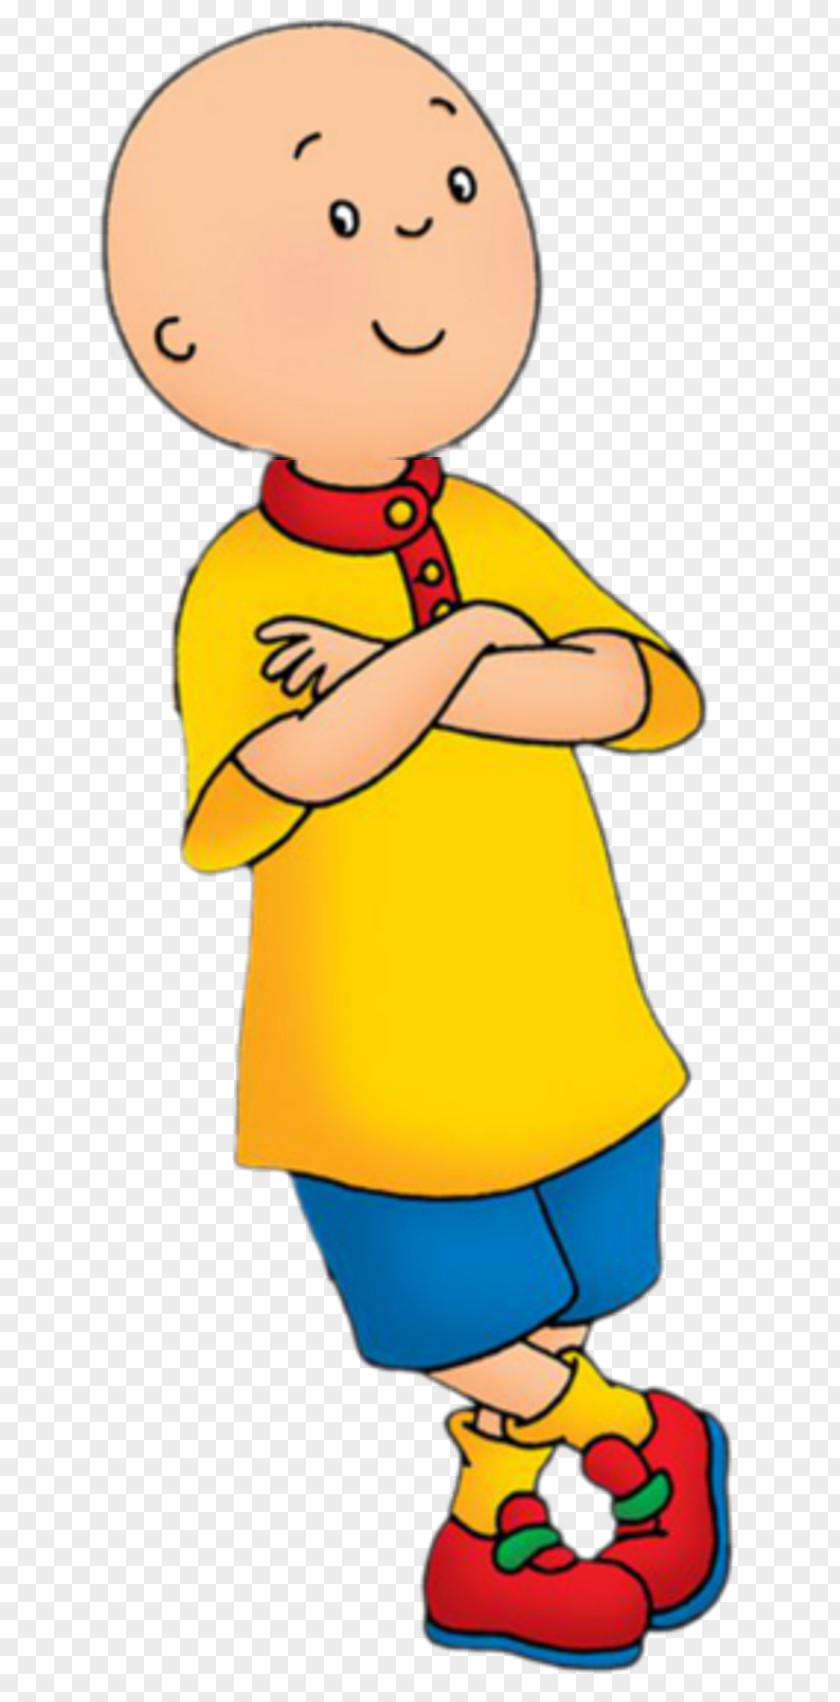 Caillou Children's Television Series Animated Film Cartoon PNG